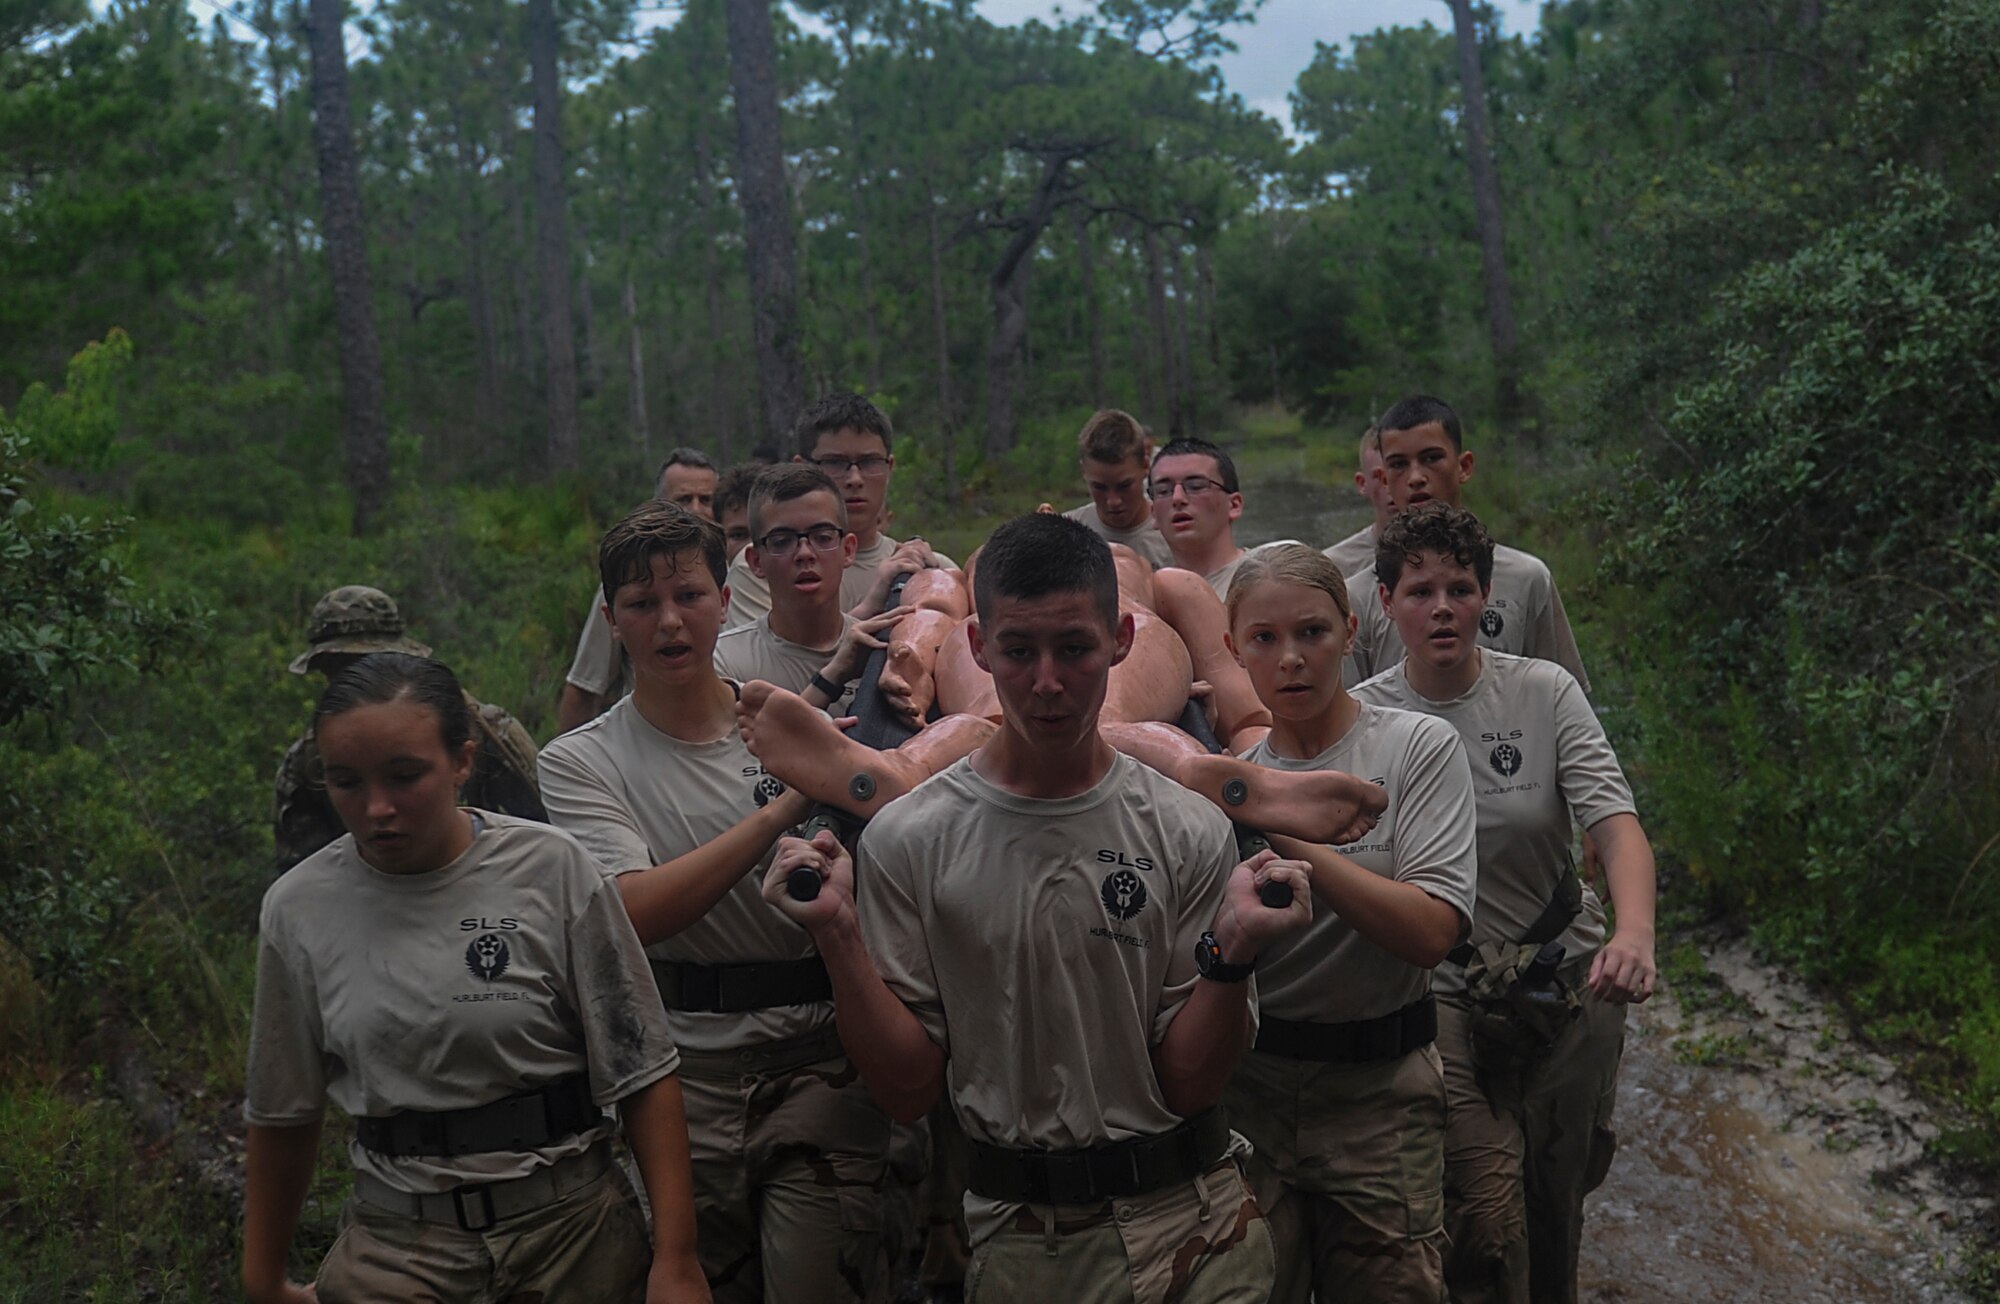 Junior ROTC cadets litter carry a simulated patient during a Monster Mash at Hurlburt Field, Fla., June 30, 2017. The JROTC Summer Leadership School brought more than 50 cadets to Hurlburt Field to engage in a variety of team-building and leadership skill-developing exercises under the guidance of Air Commandos, June 26 through 30. (U.S. Air Force photo by Airman 1st Class Rachel Yates)